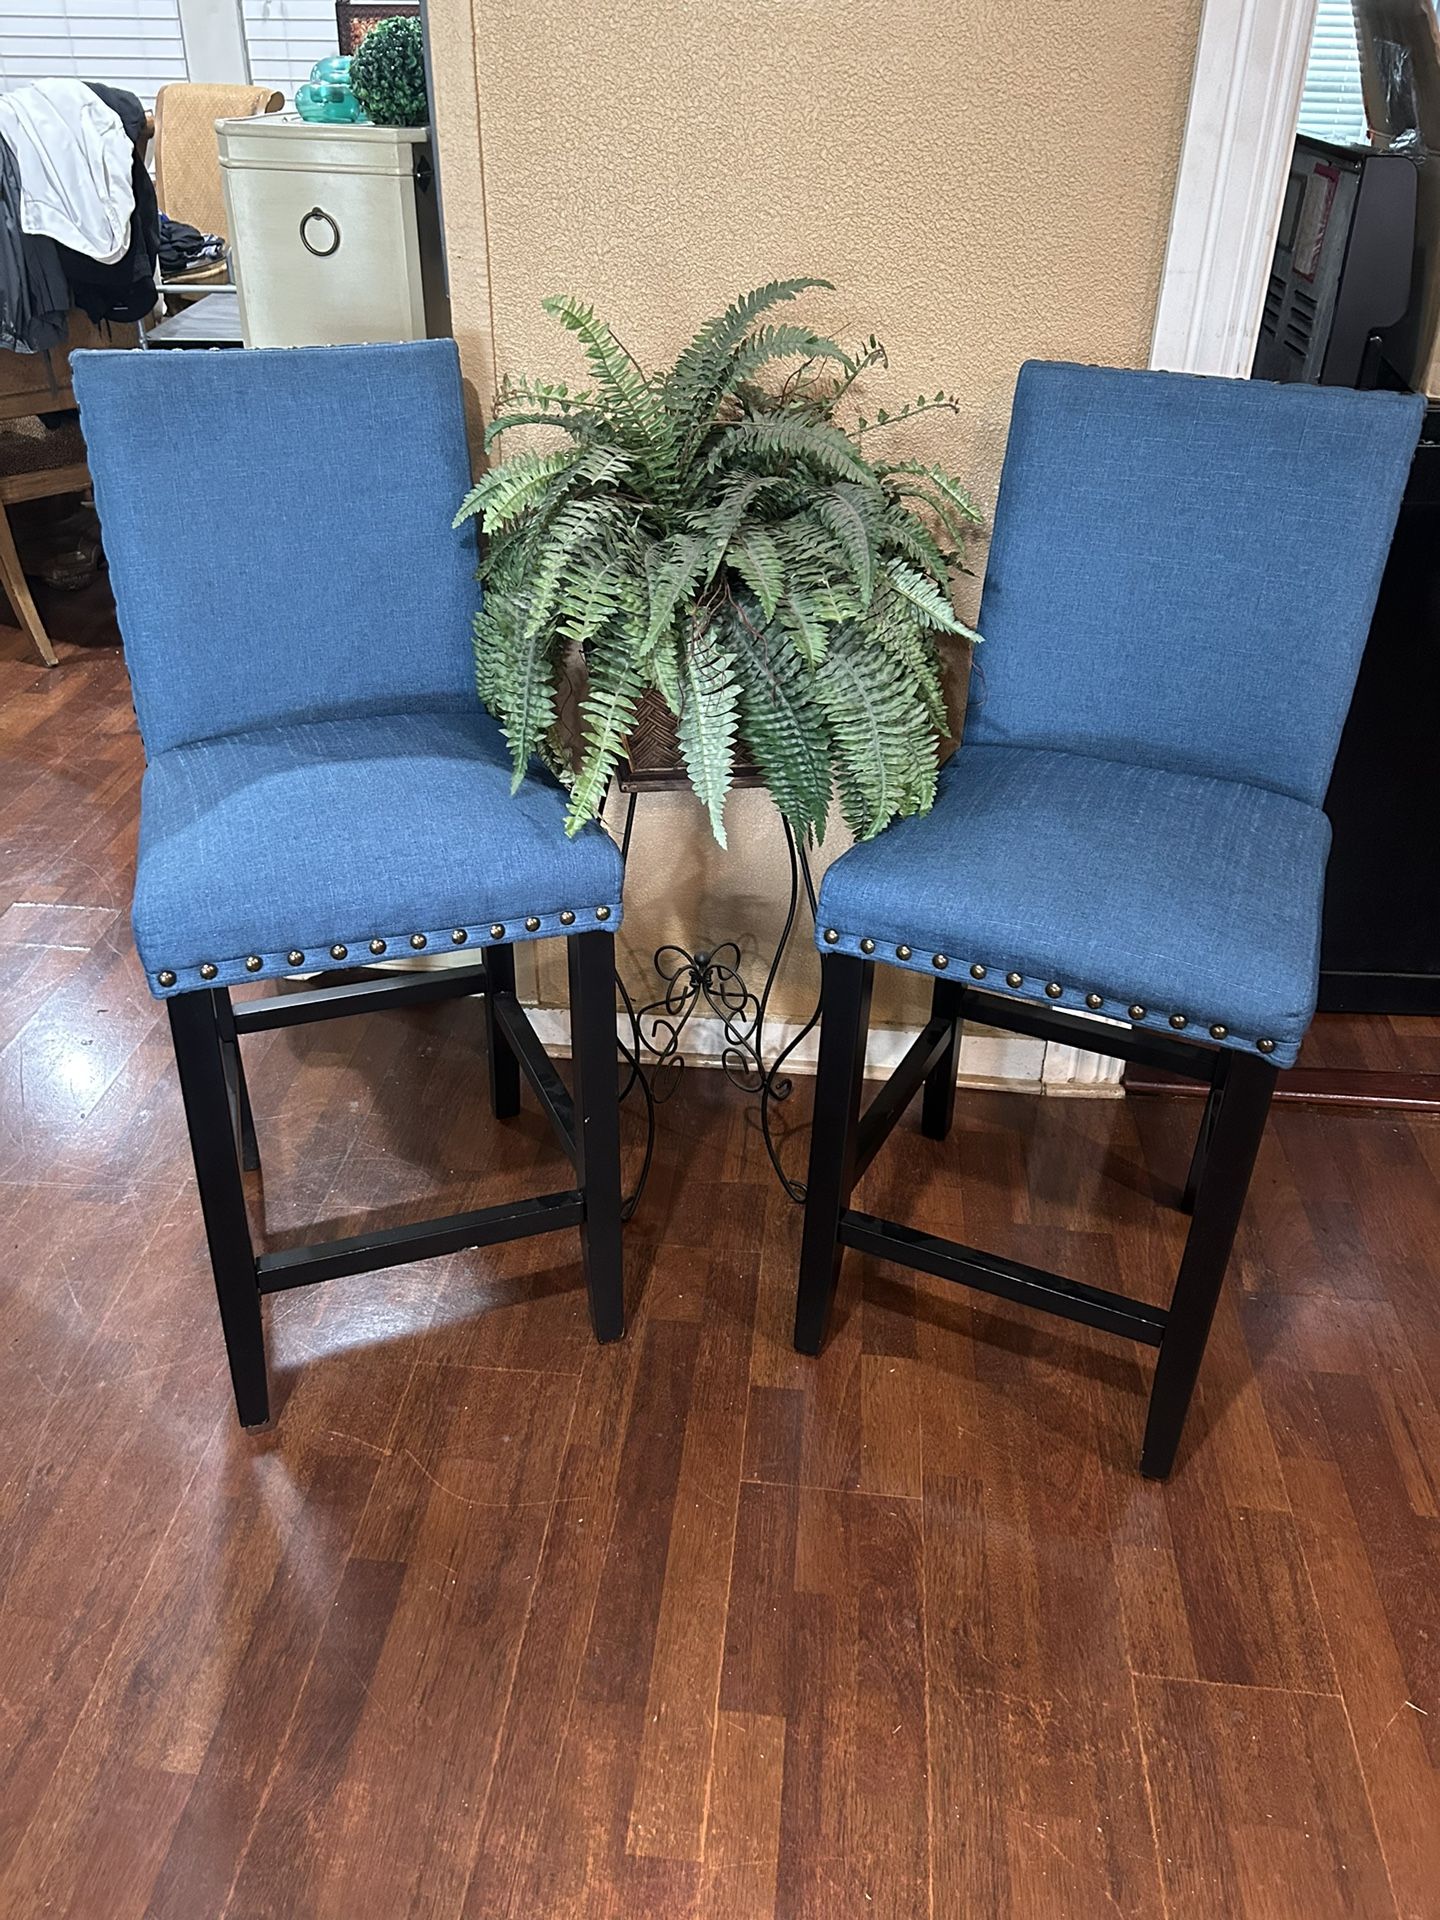 Beautiful Pair Of Turquoise Counter Height Barstools:24” Nailheads. Clean , Very Good Condition 